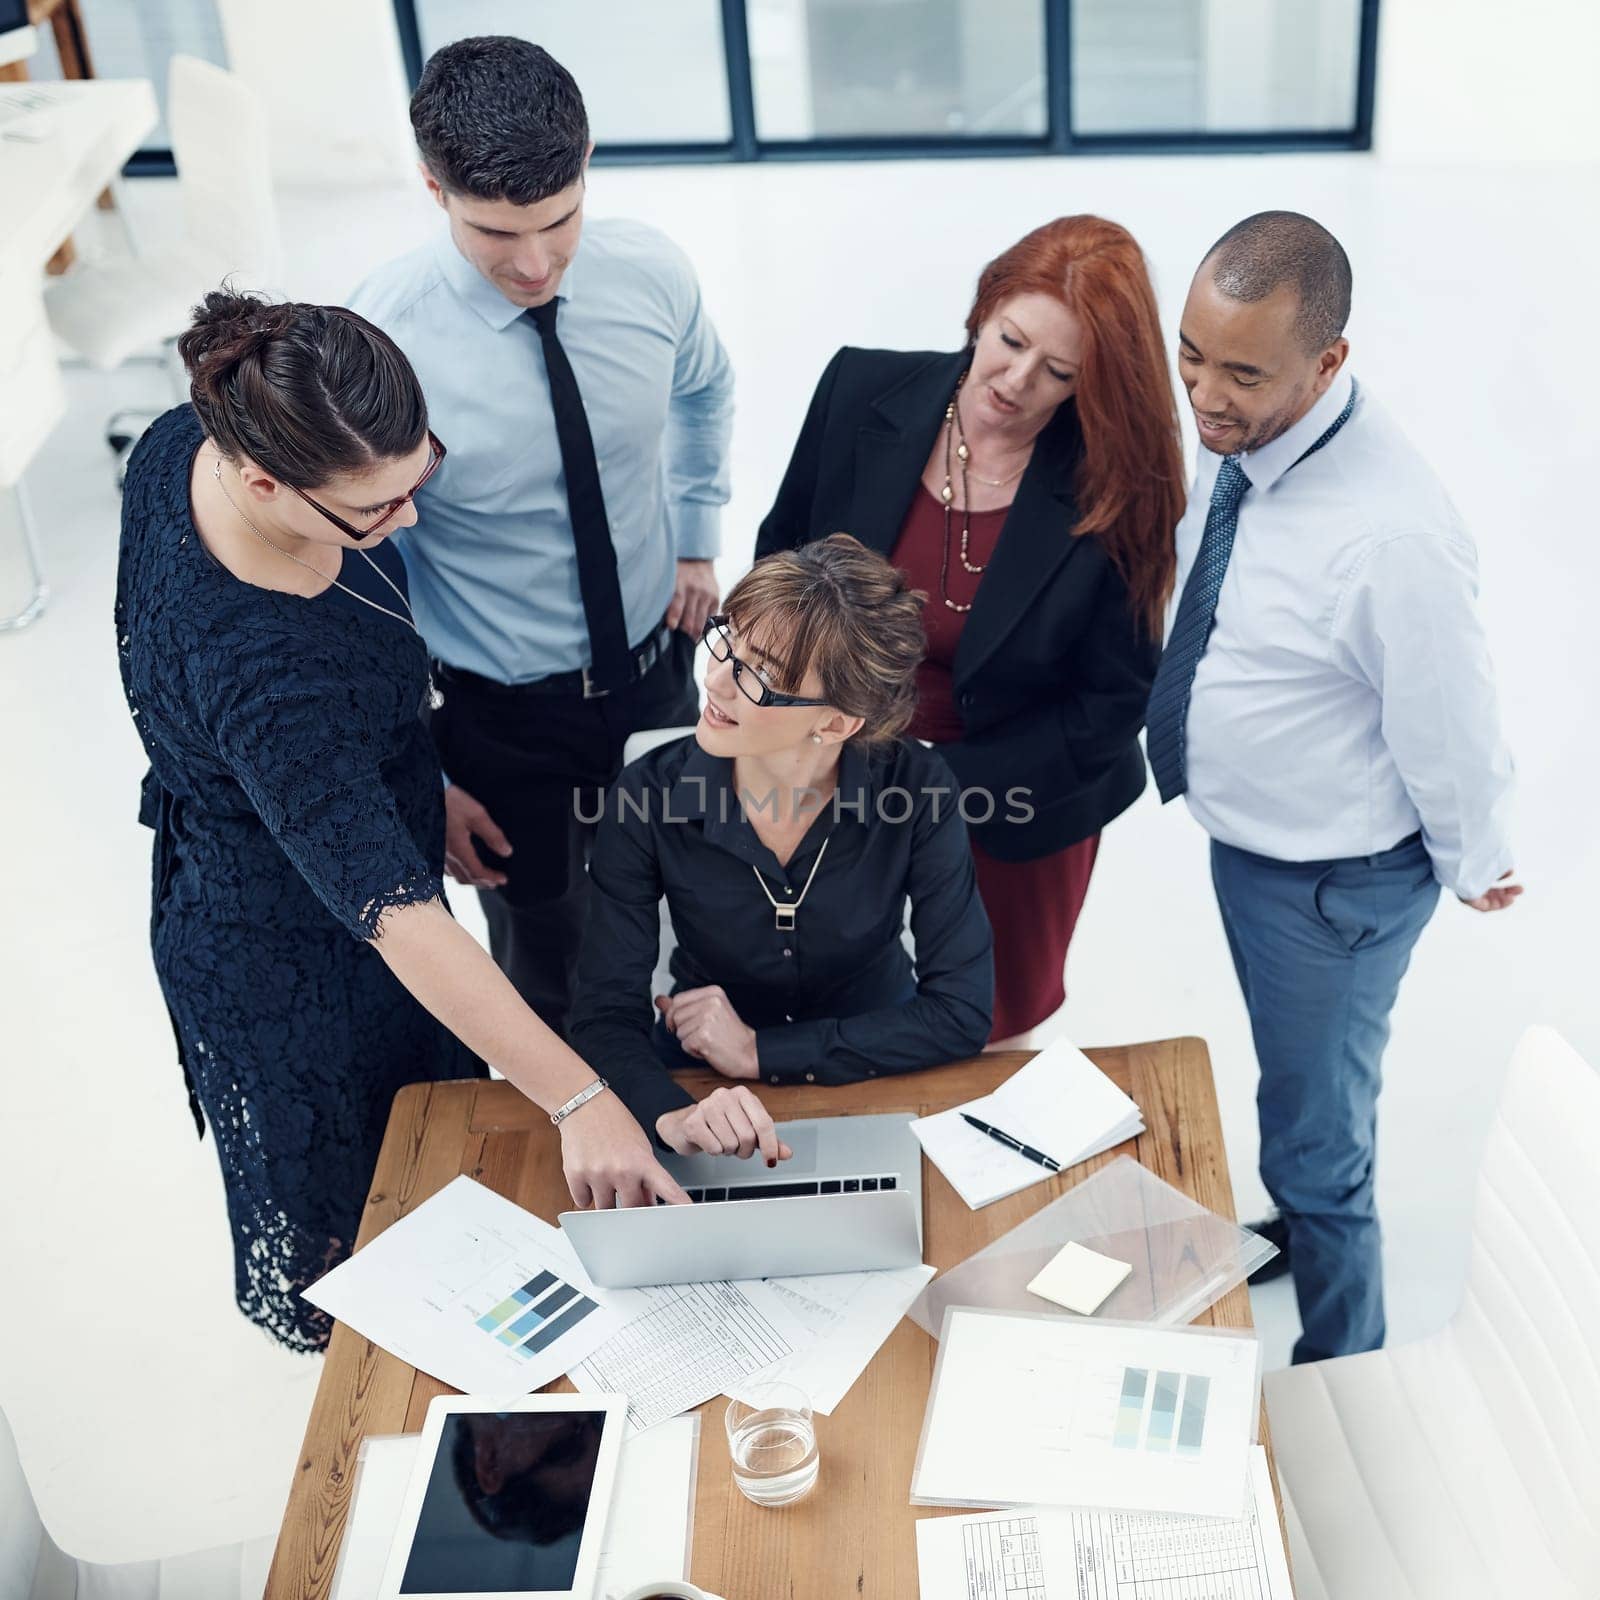 Letting technology drive their business processes and functions. group of businesspeople using a laptop together during a meeting in an office